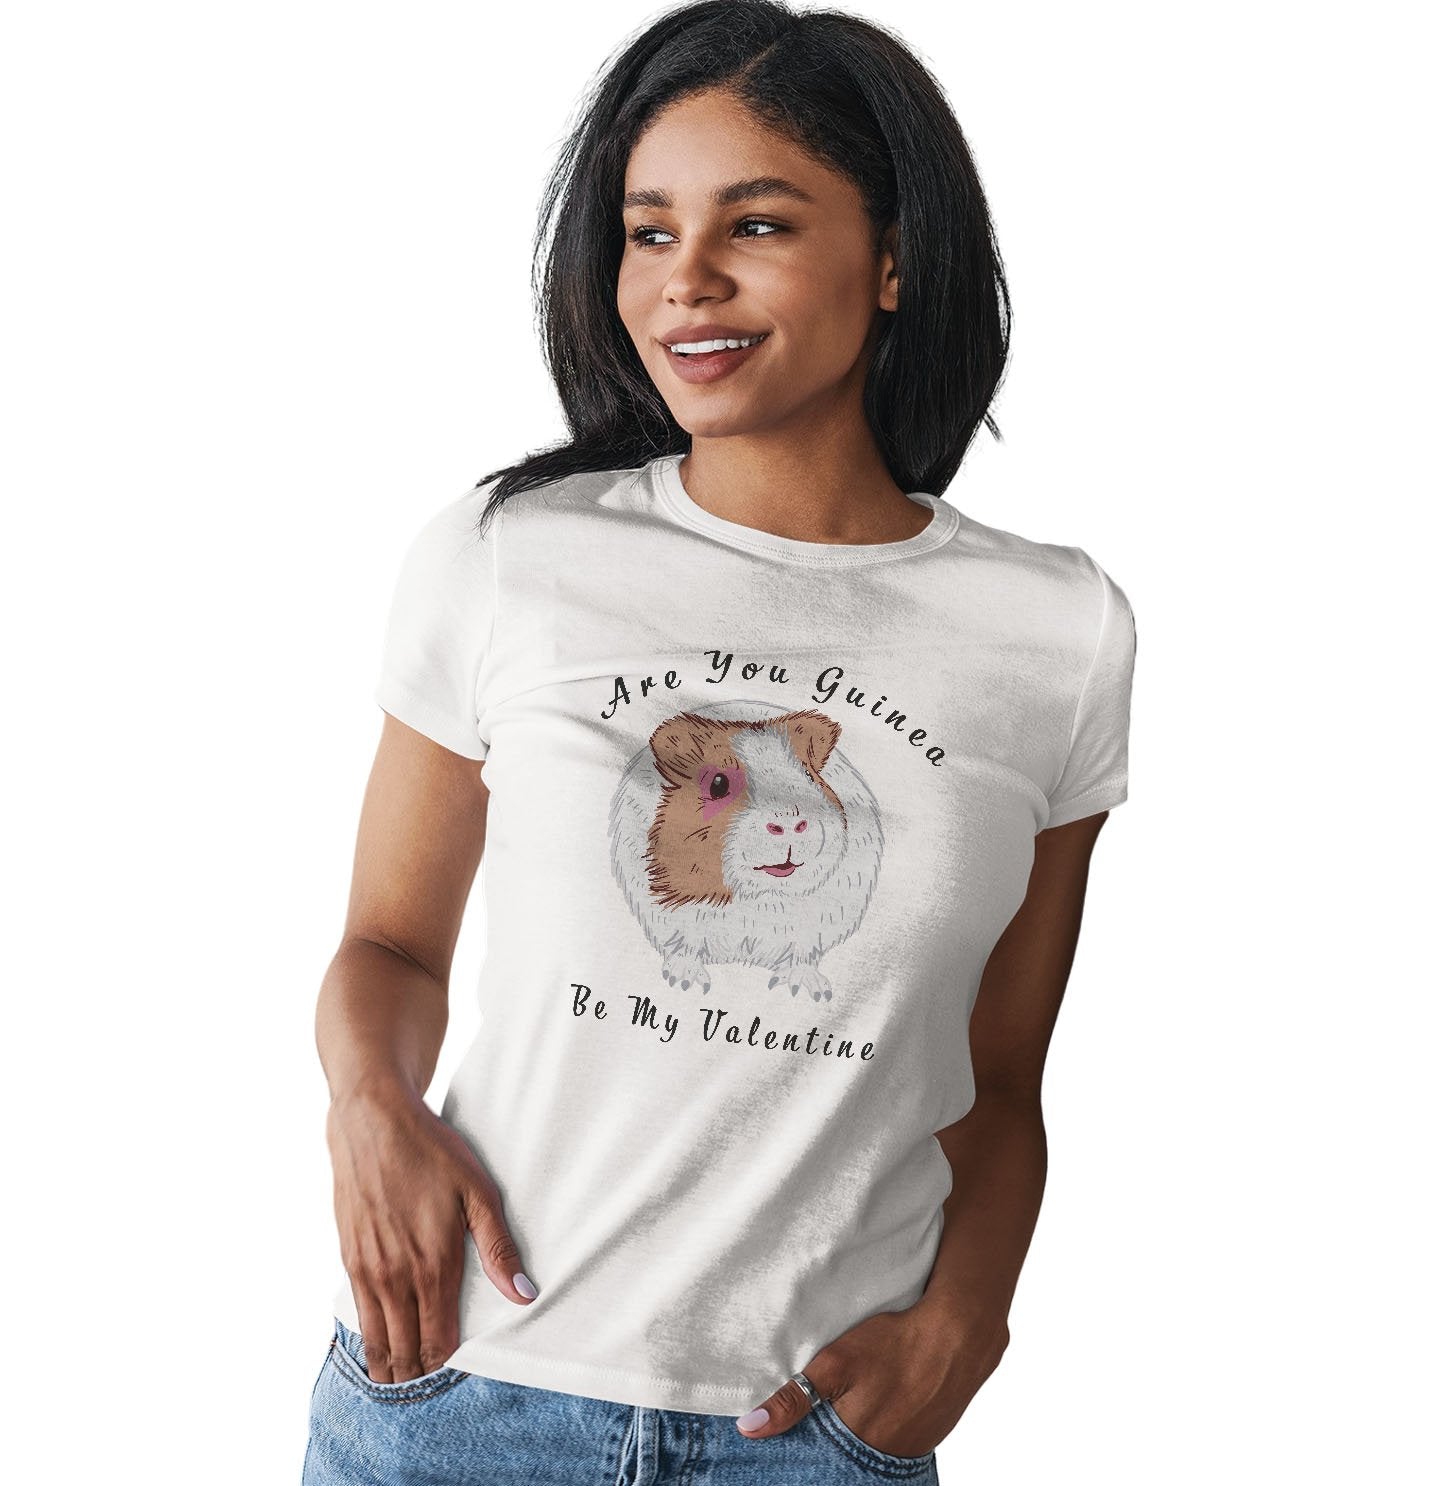 Guinea Be My Valentine - Women's Fitted T-Shirt